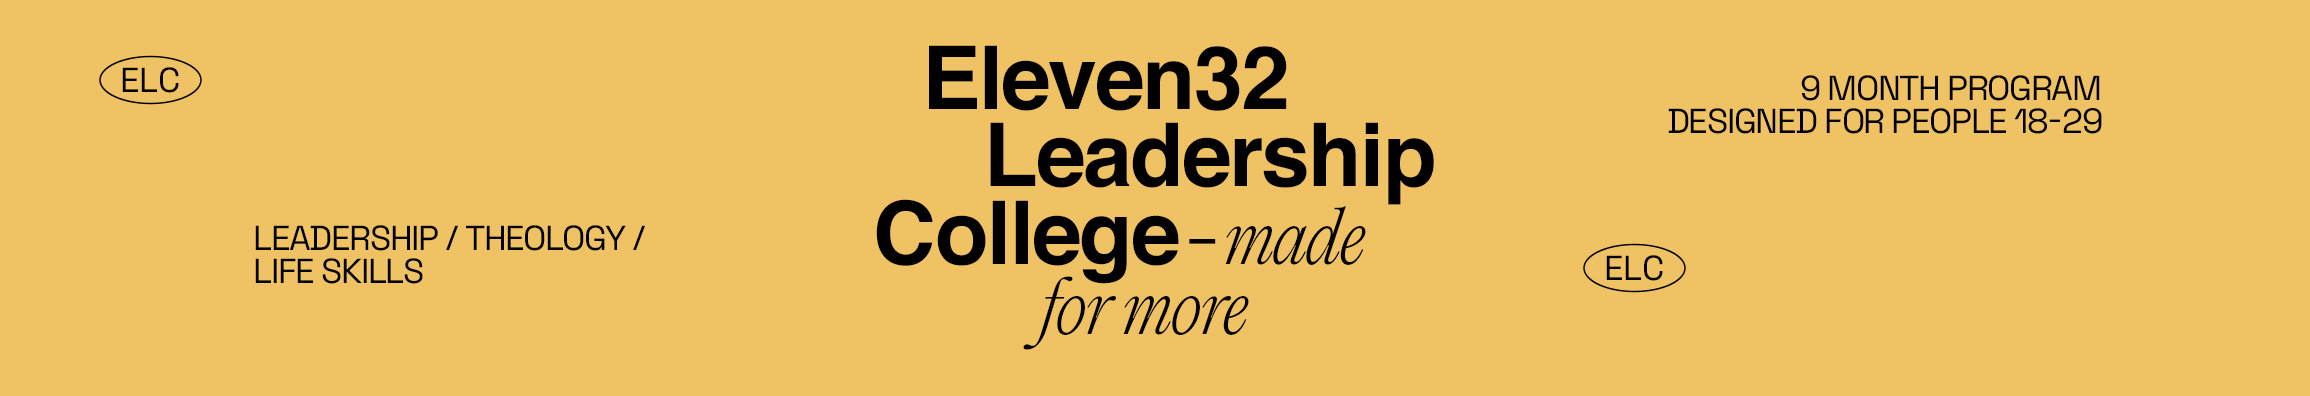 Leadership College at Church Eleven32